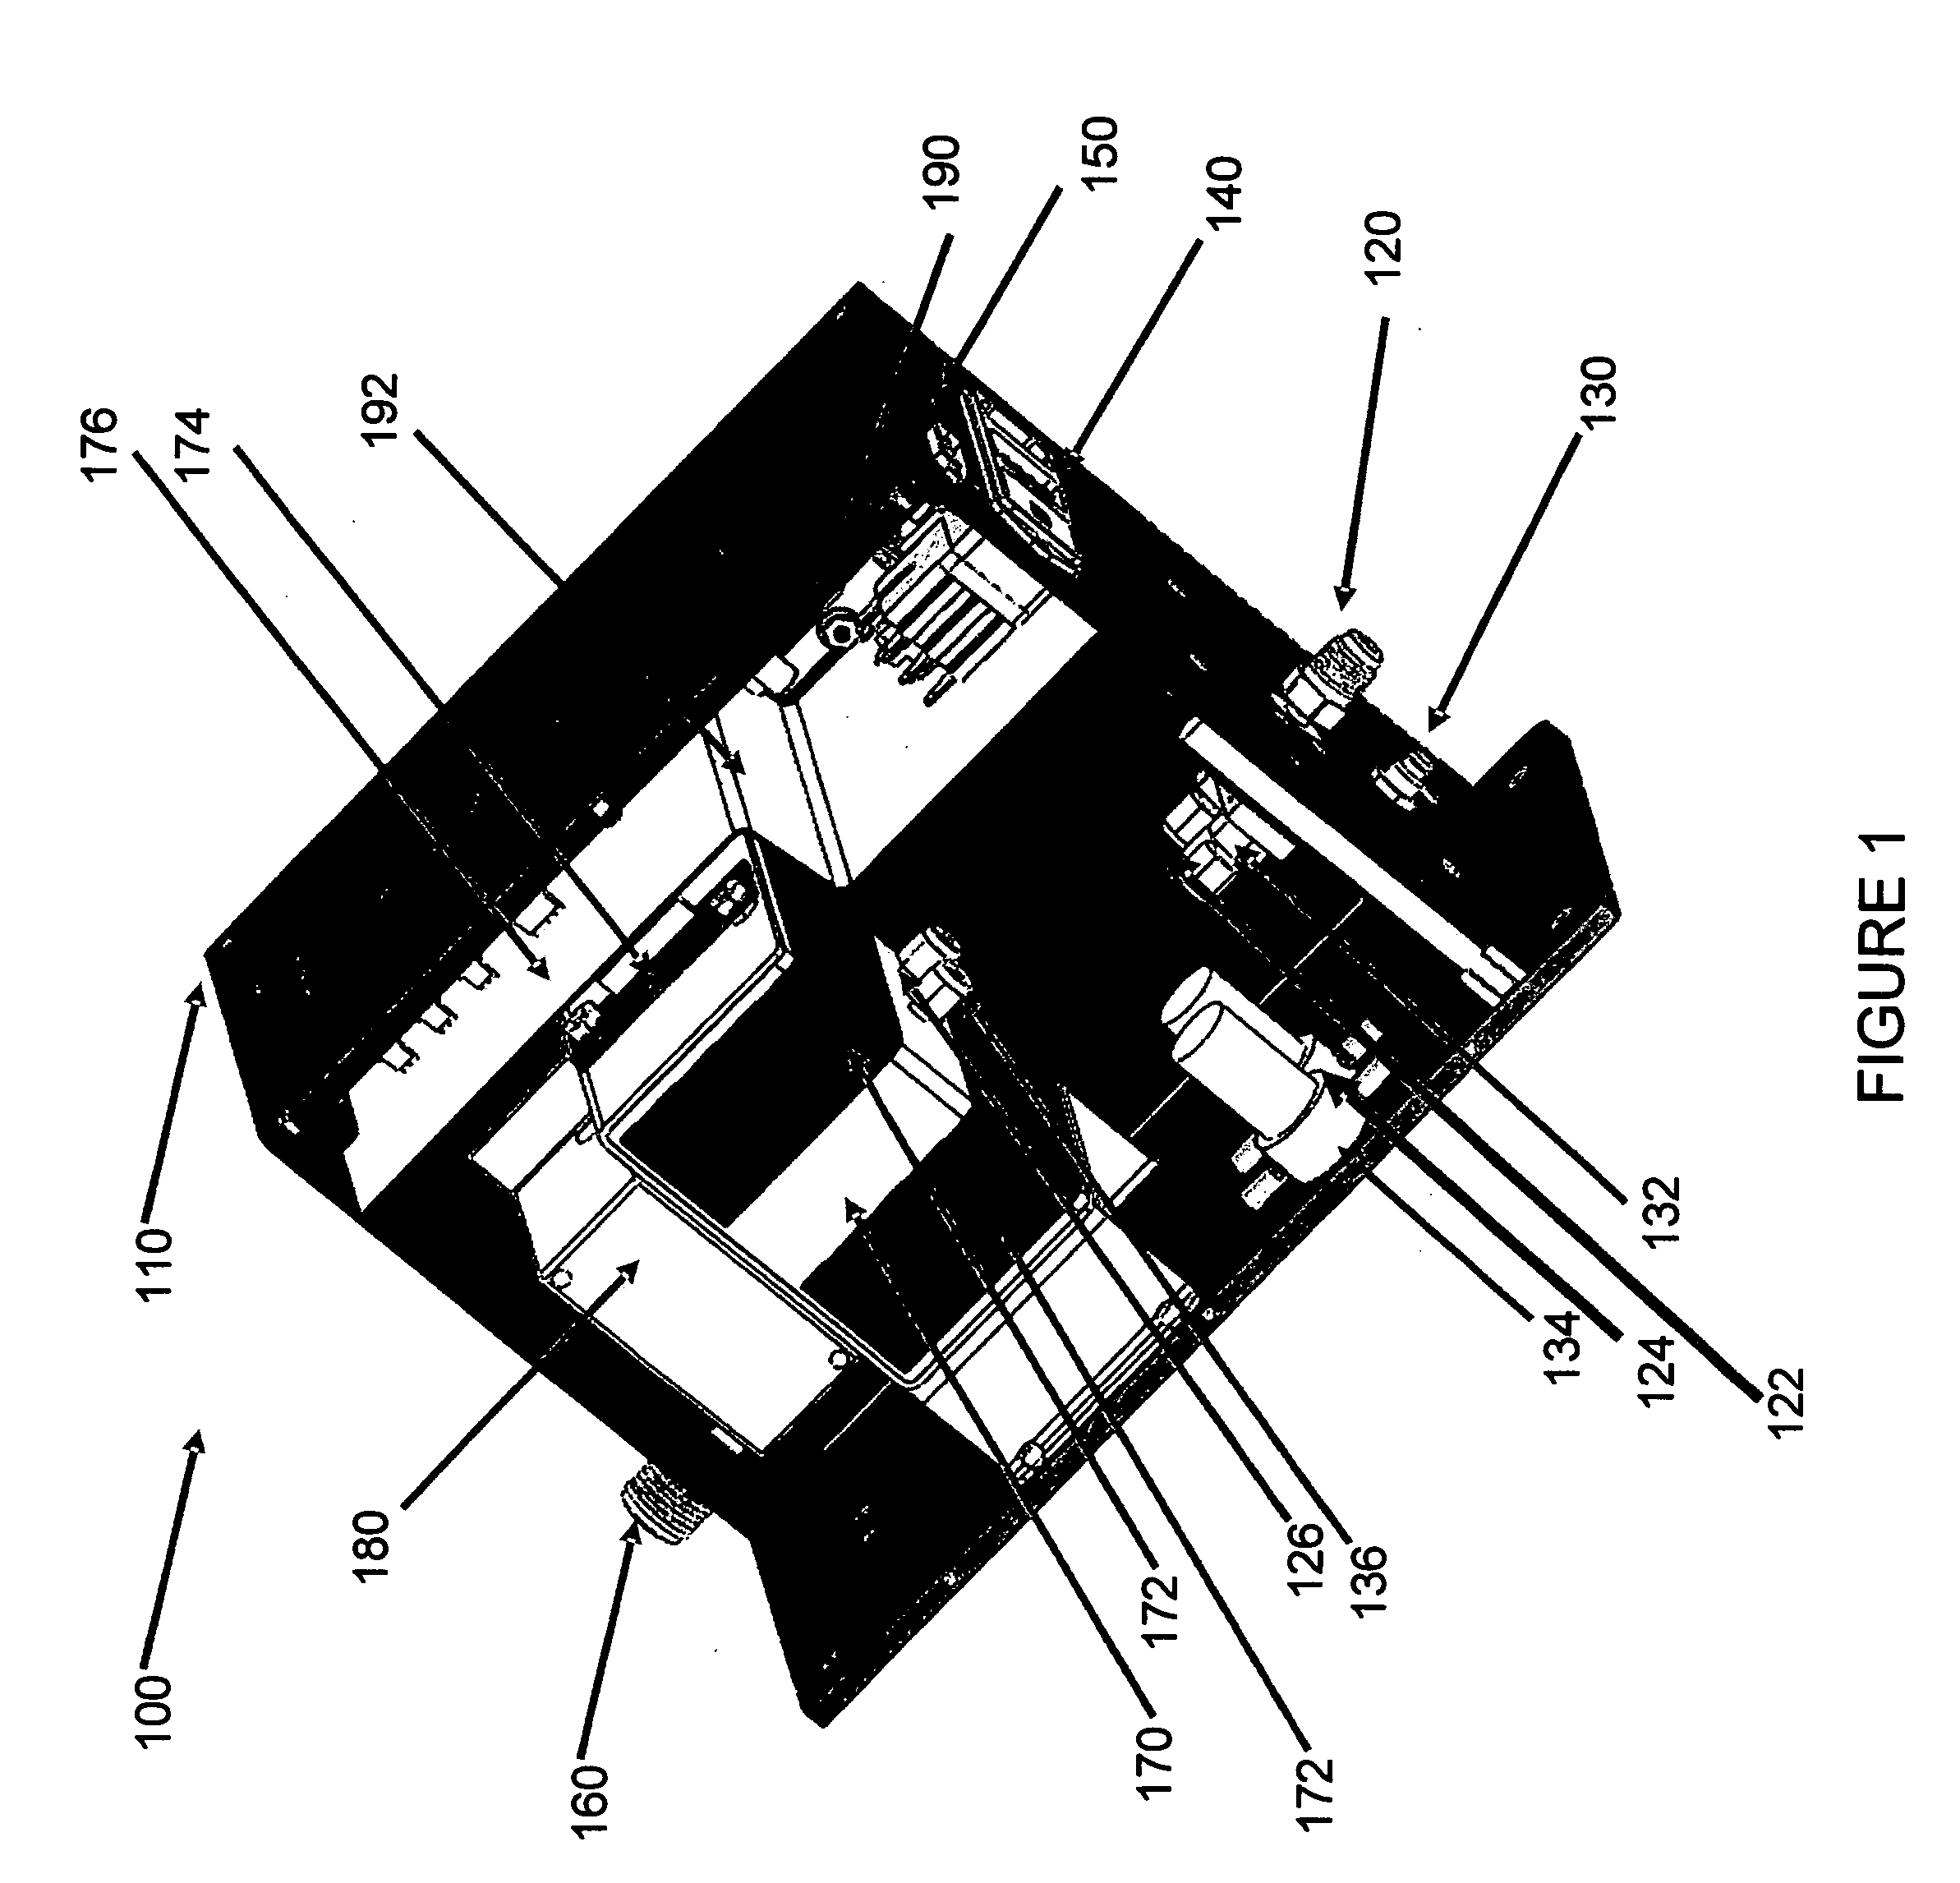 System and method for producing and delivering vapor